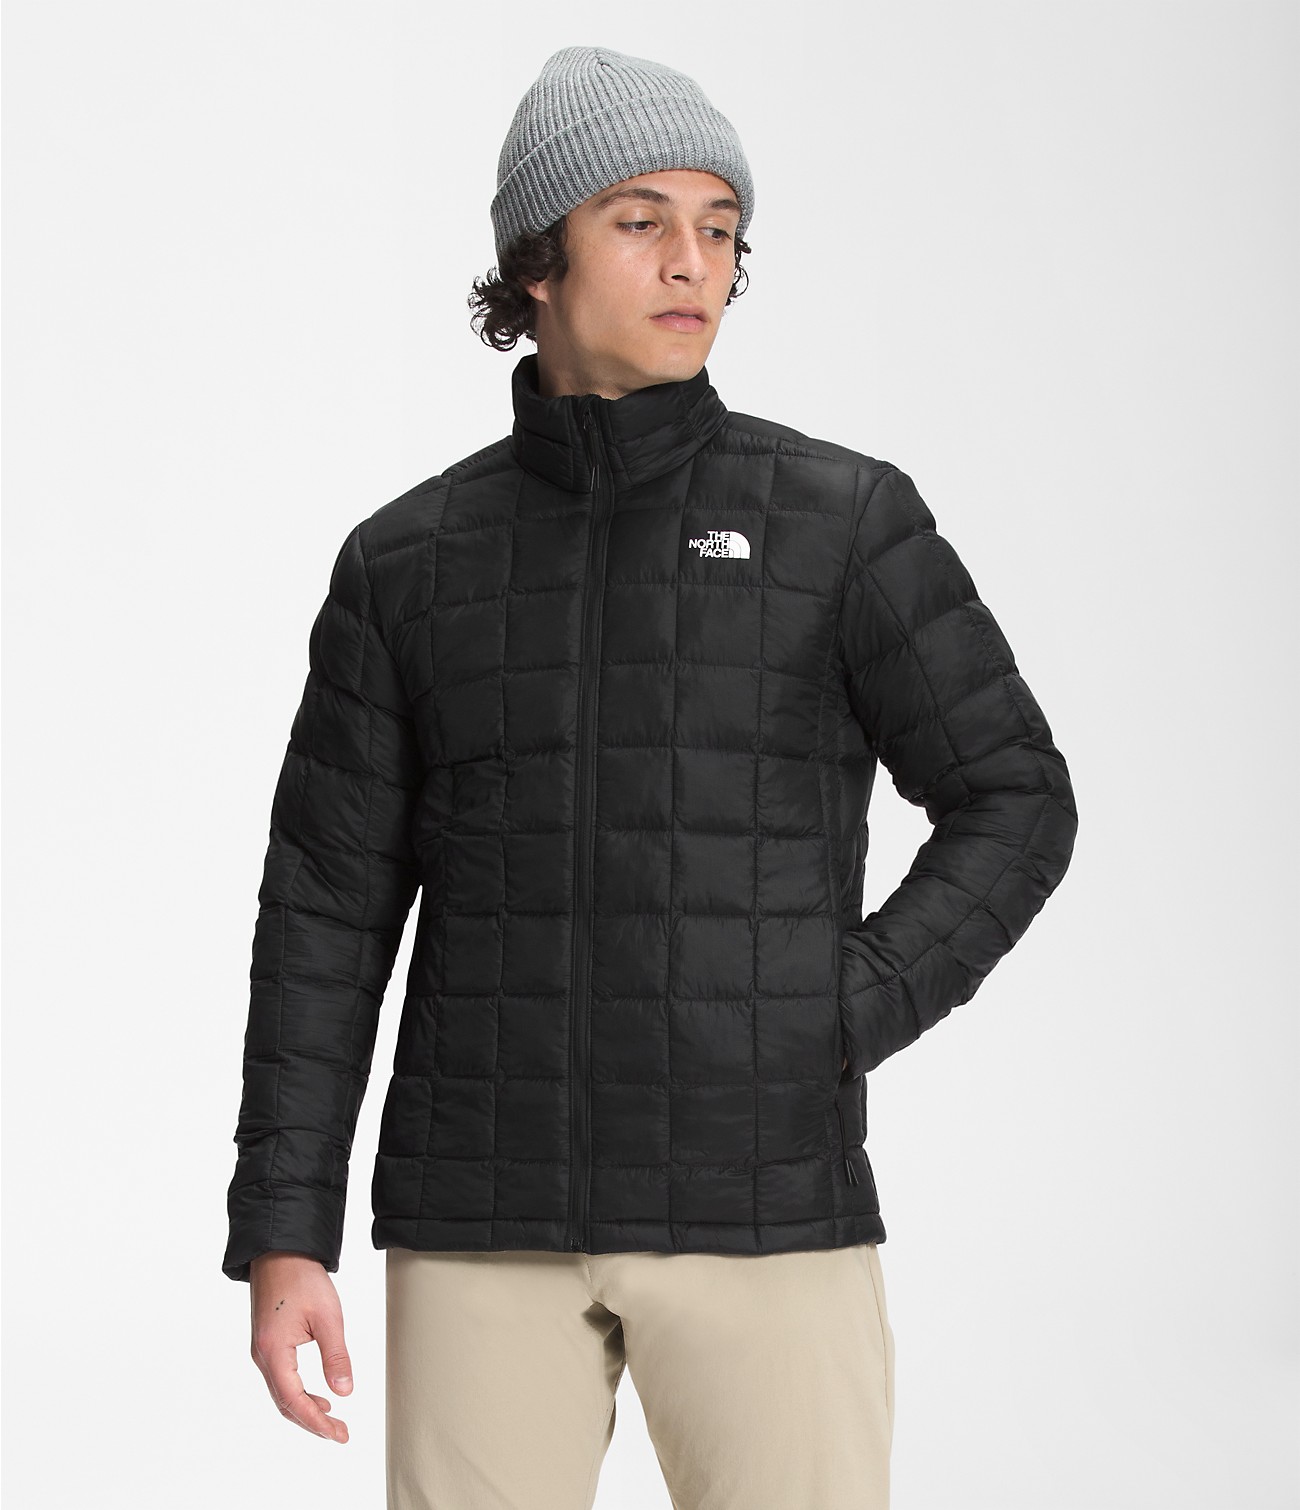 Unlock Wilderness' choice in the Haglöfs Vs North Face comparison, the ThermoBall™ Eco Jacket 2.0 by The North Face